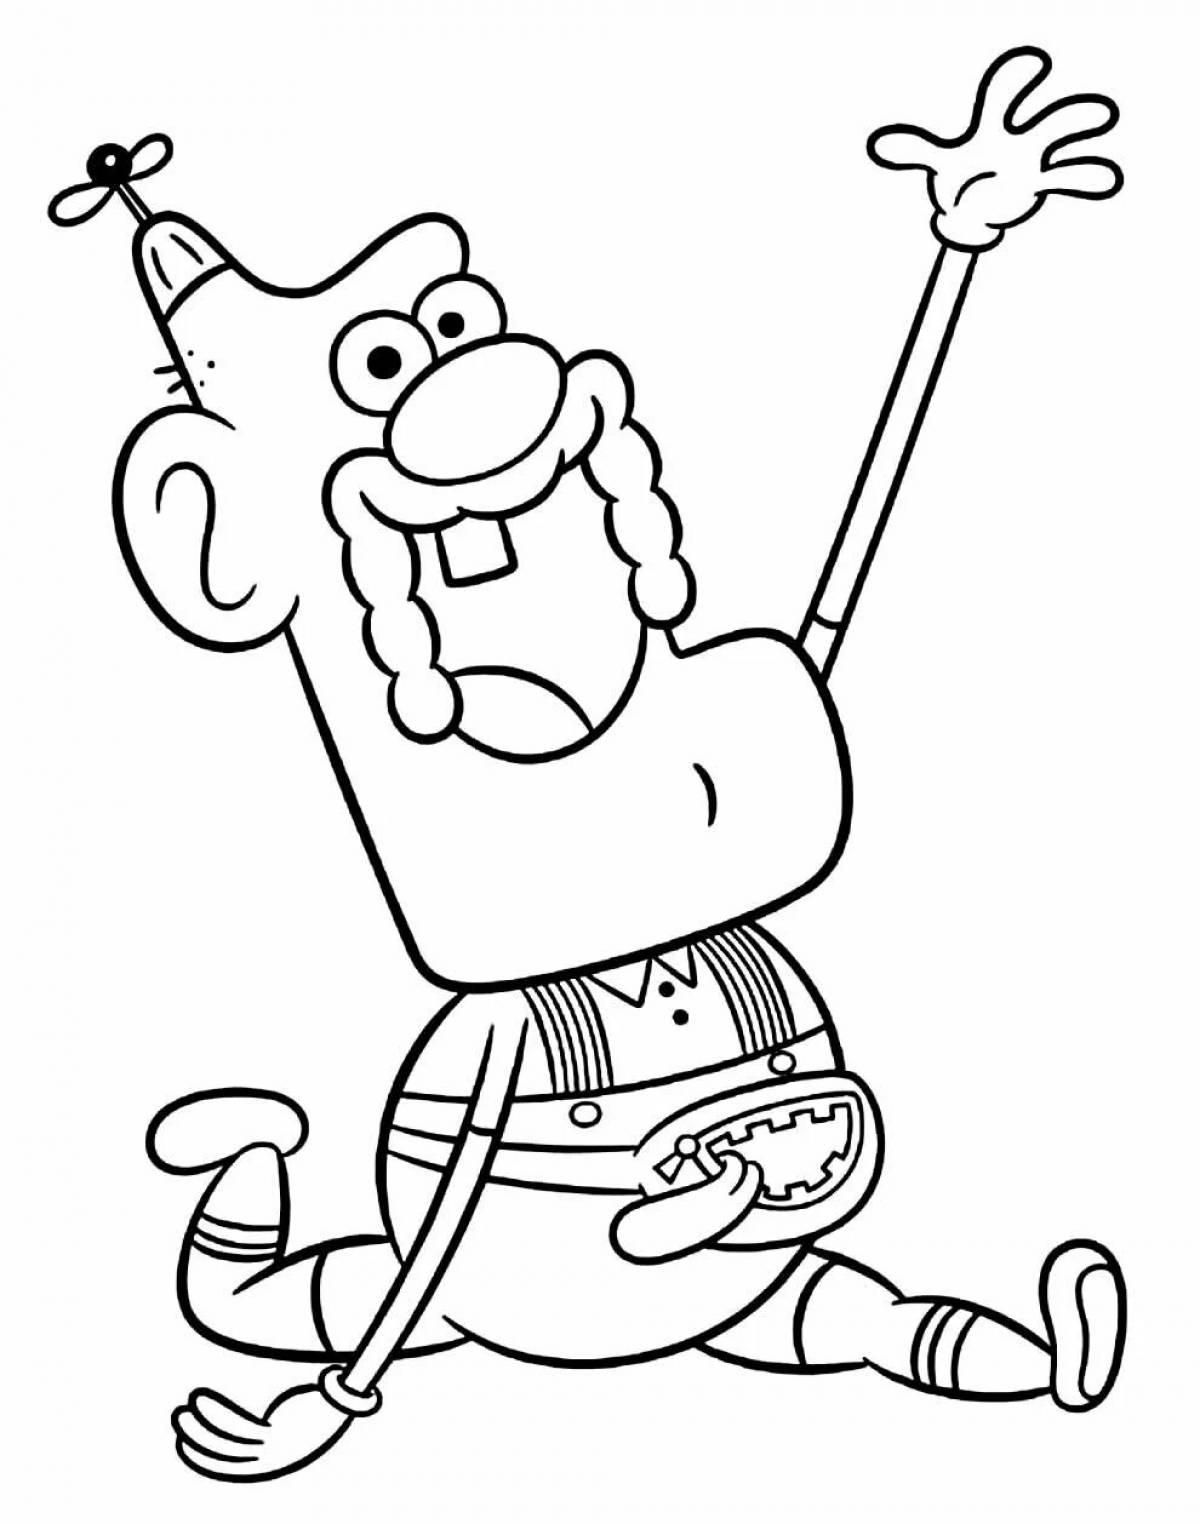 Shock Uncle coloring page